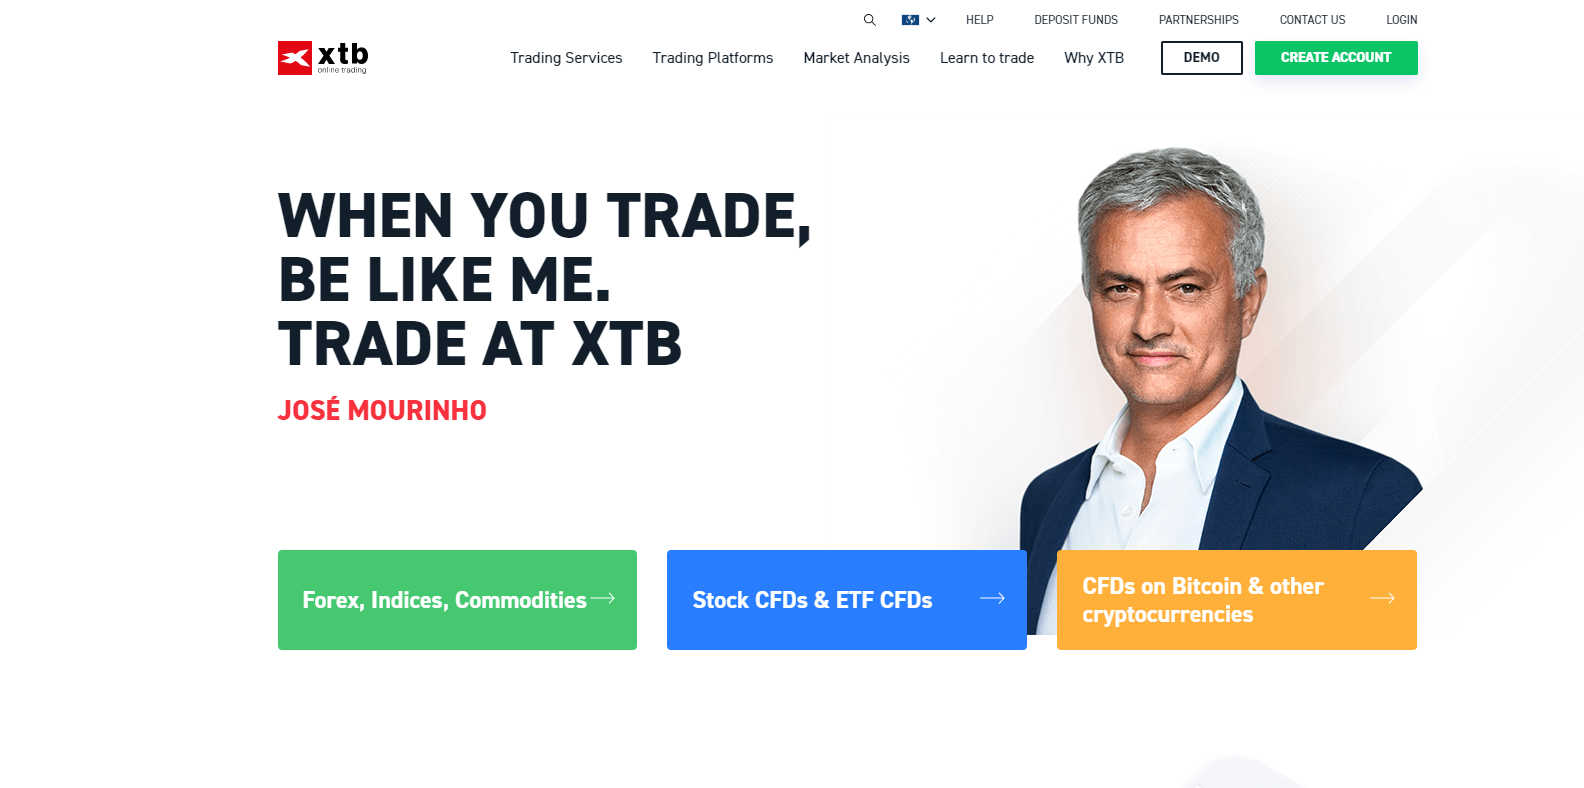 The official website of XTB